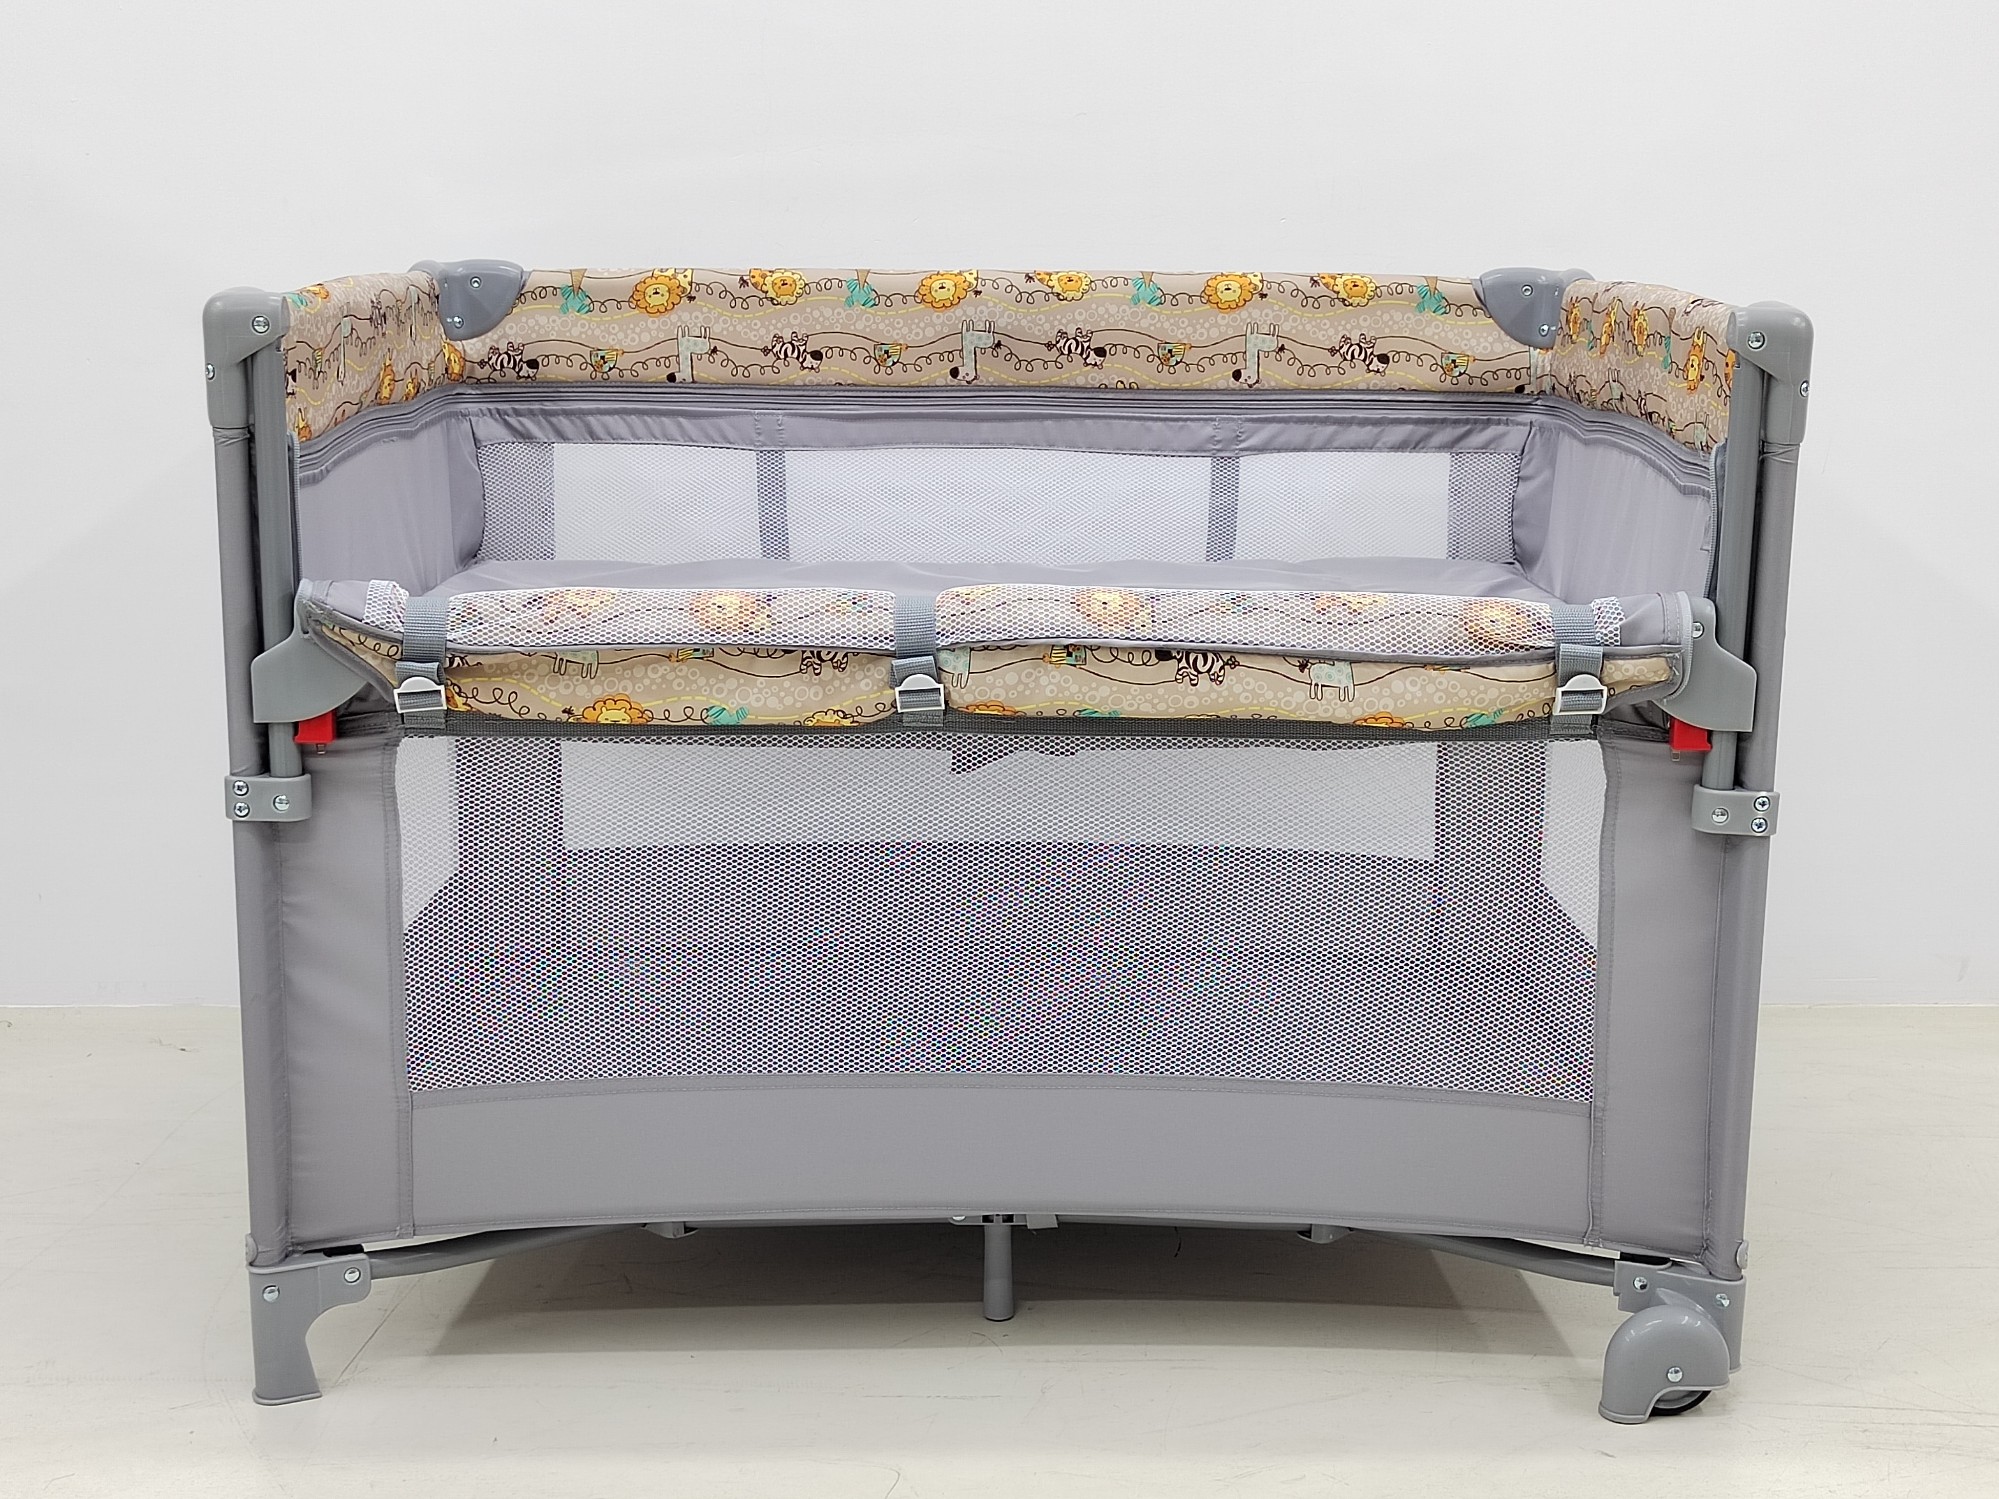 Manufacturer Foldable travel cot playpen baby beside sleeper next to me drop side cot for hospital bedroom use